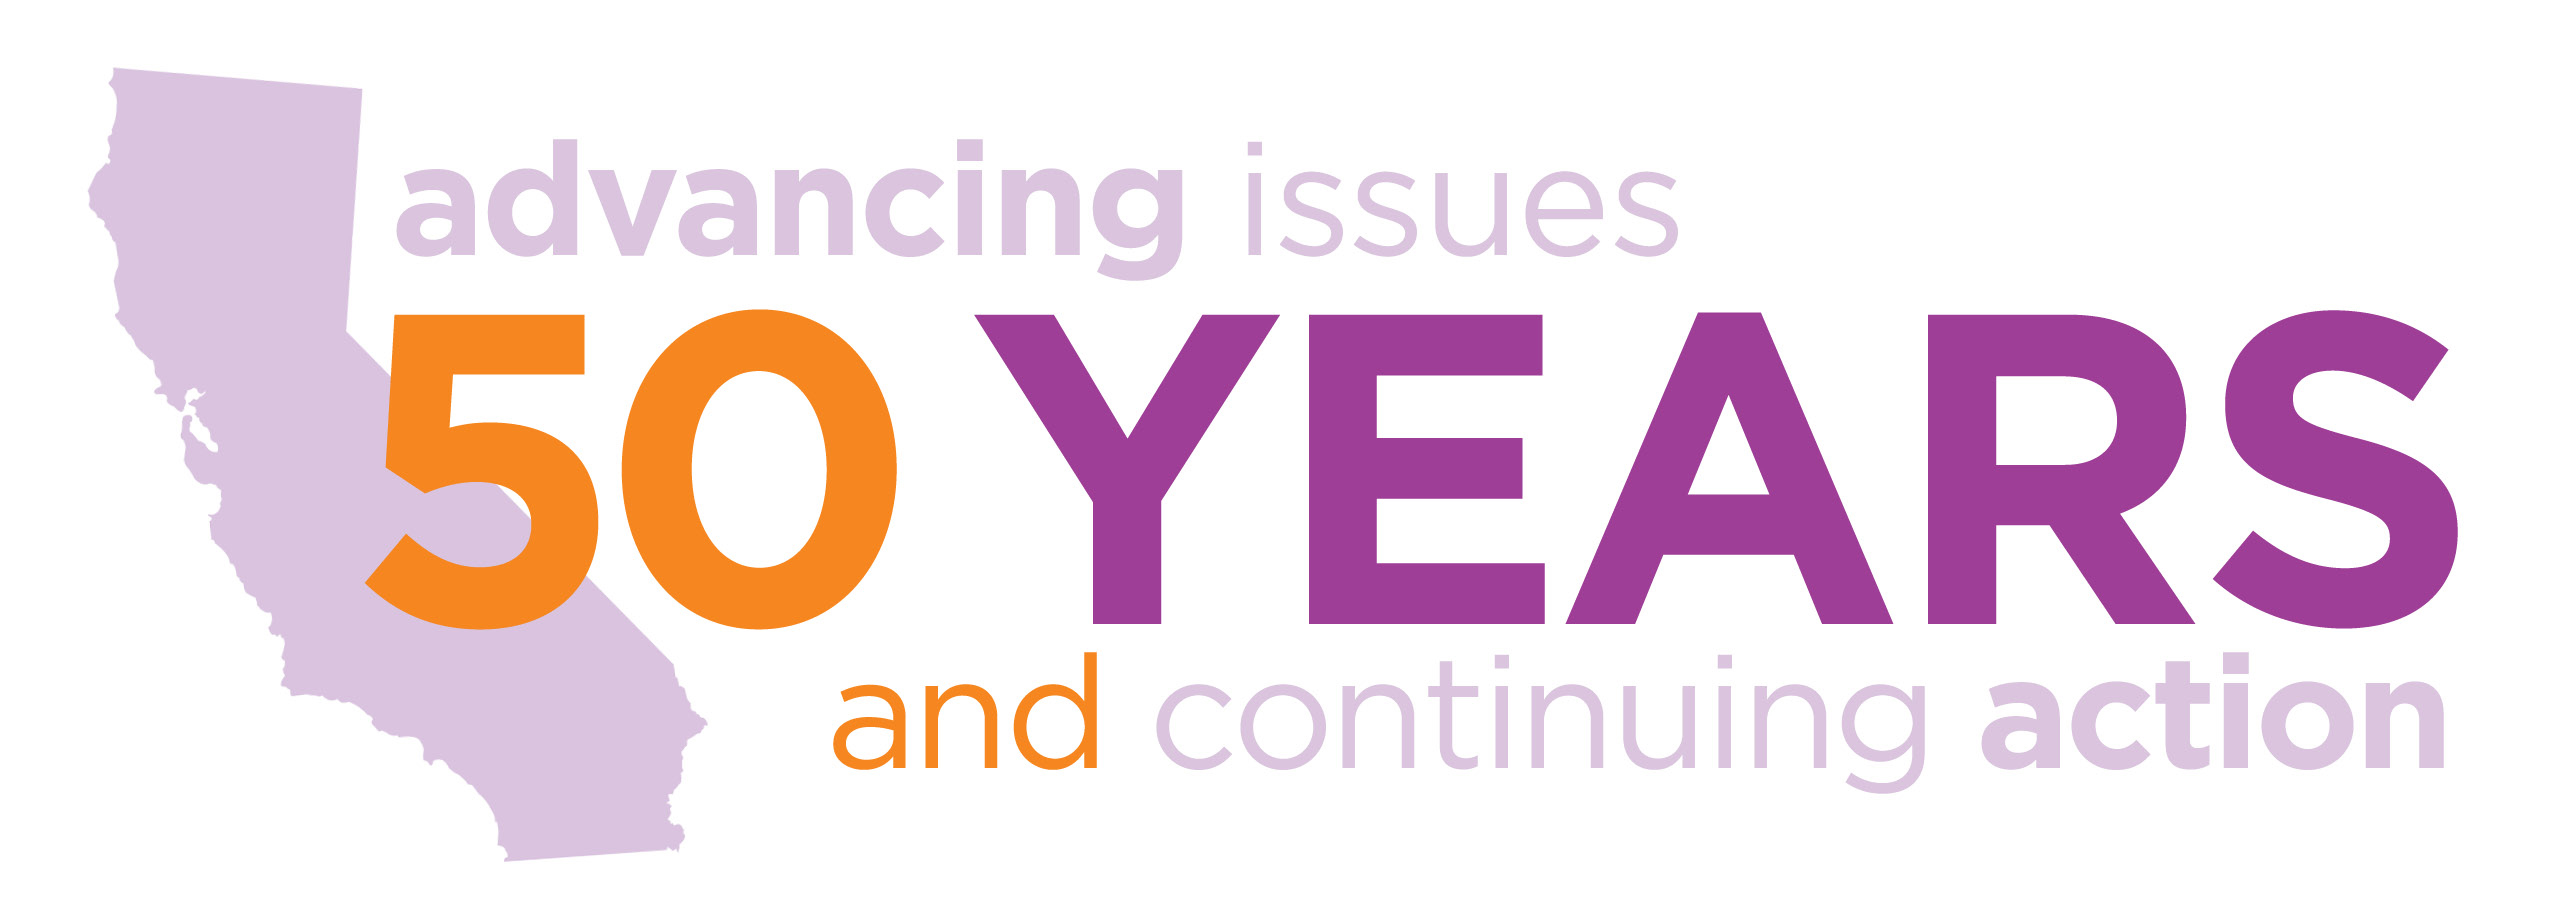 50 Years of advancing issues and continuing action